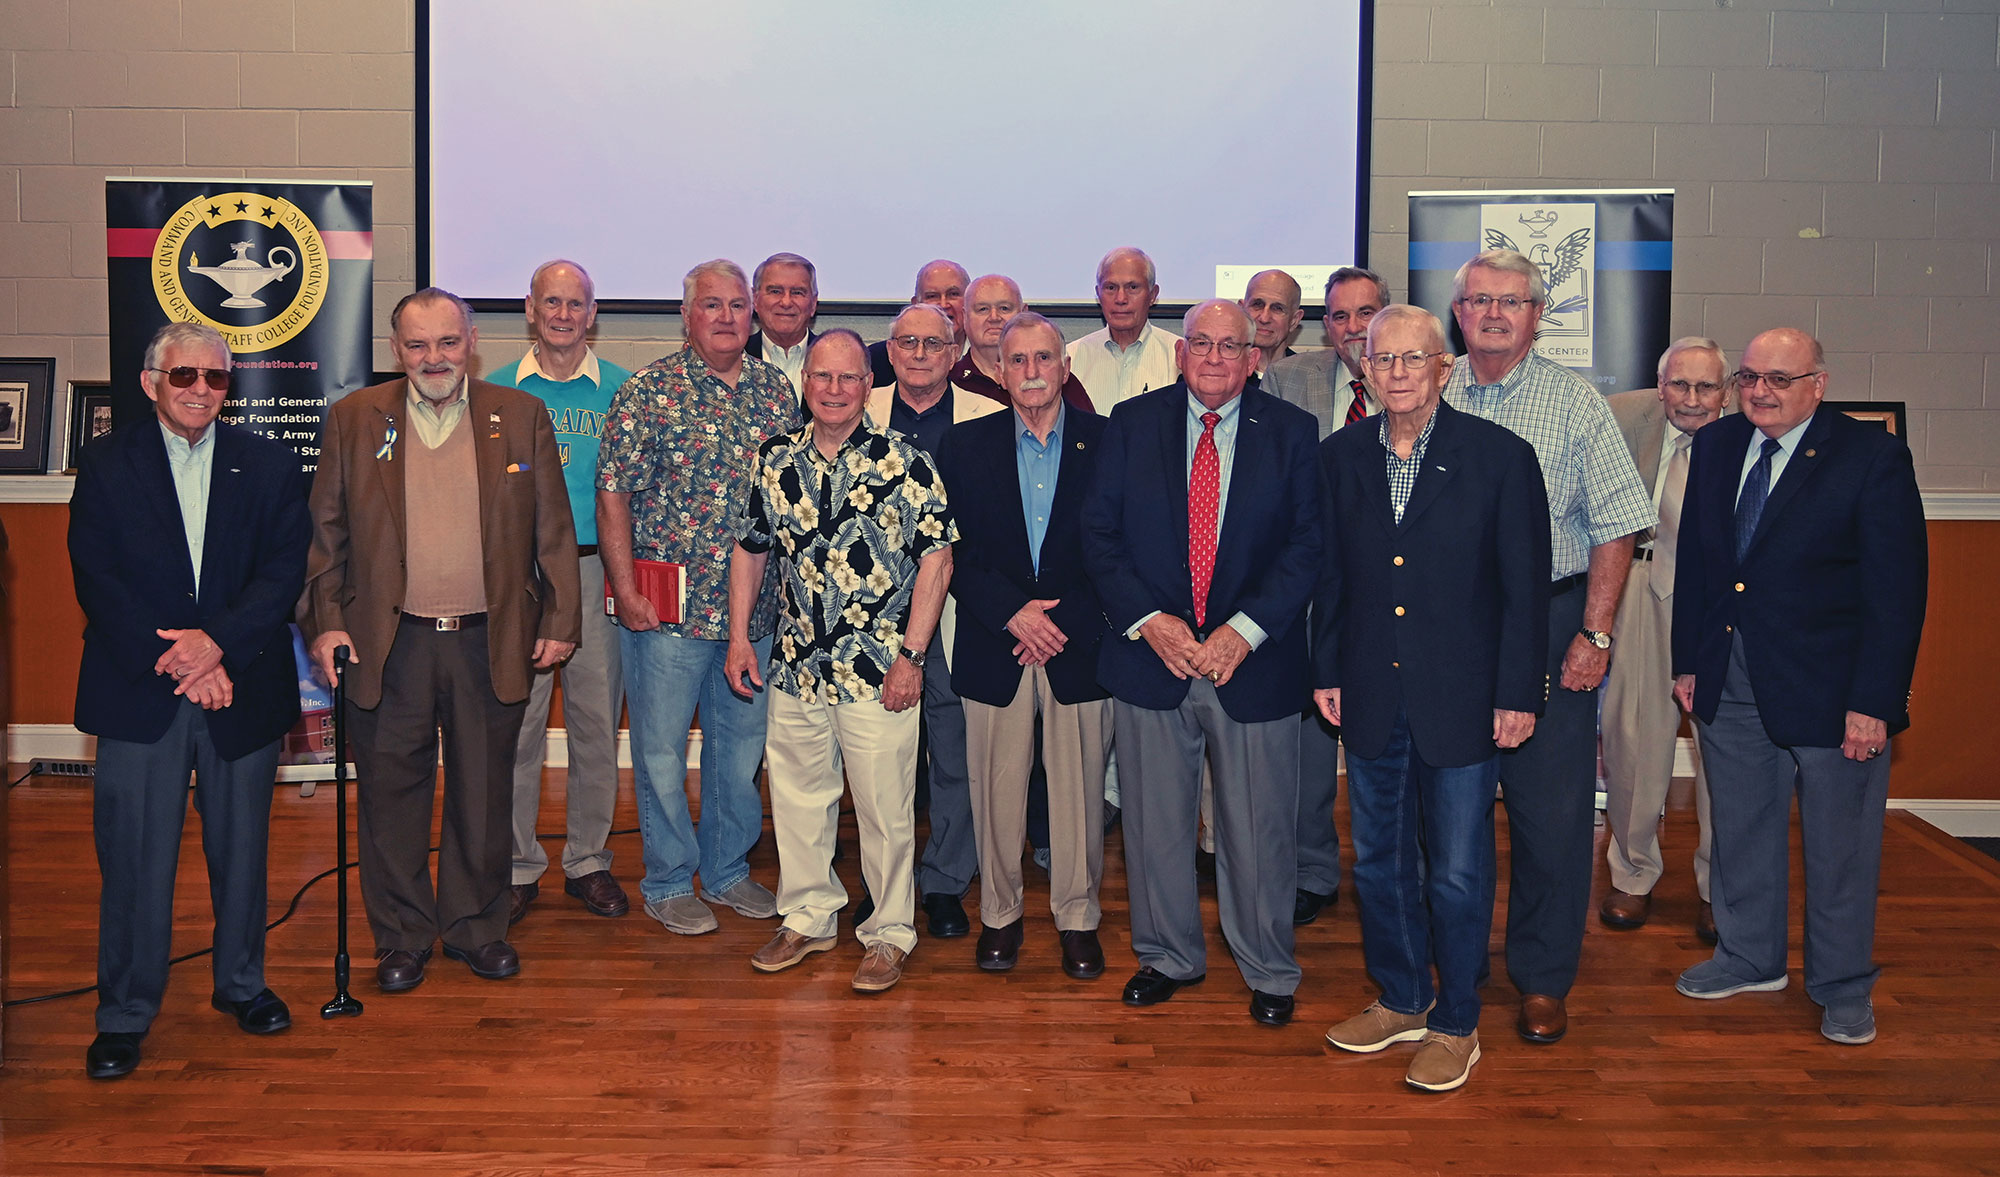 Vietnam veterans gather for a group photo after Dr. James H. Willbanks presented the 14th lecture in the CGSC Foundation's Vietnam War Commemoration Lecture Series on May 12, 2022, at June's Northland in downtown Leavenworth, Kansas.